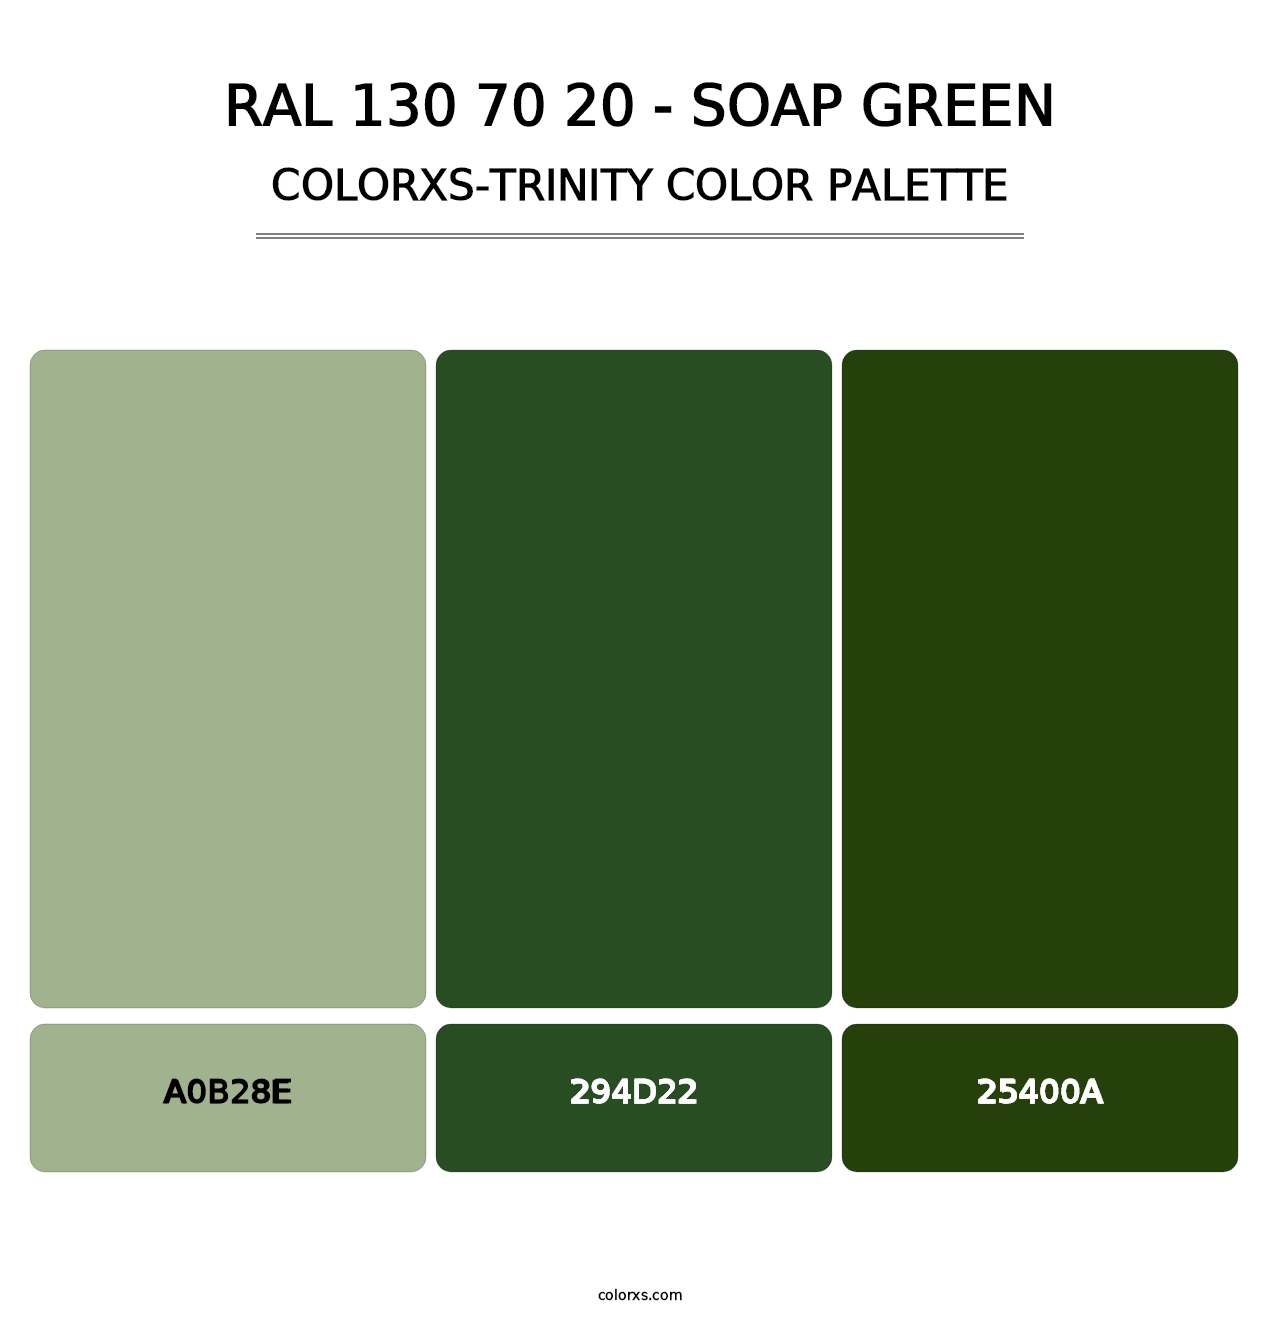 RAL 130 70 20 - Soap Green - Colorxs Trinity Palette